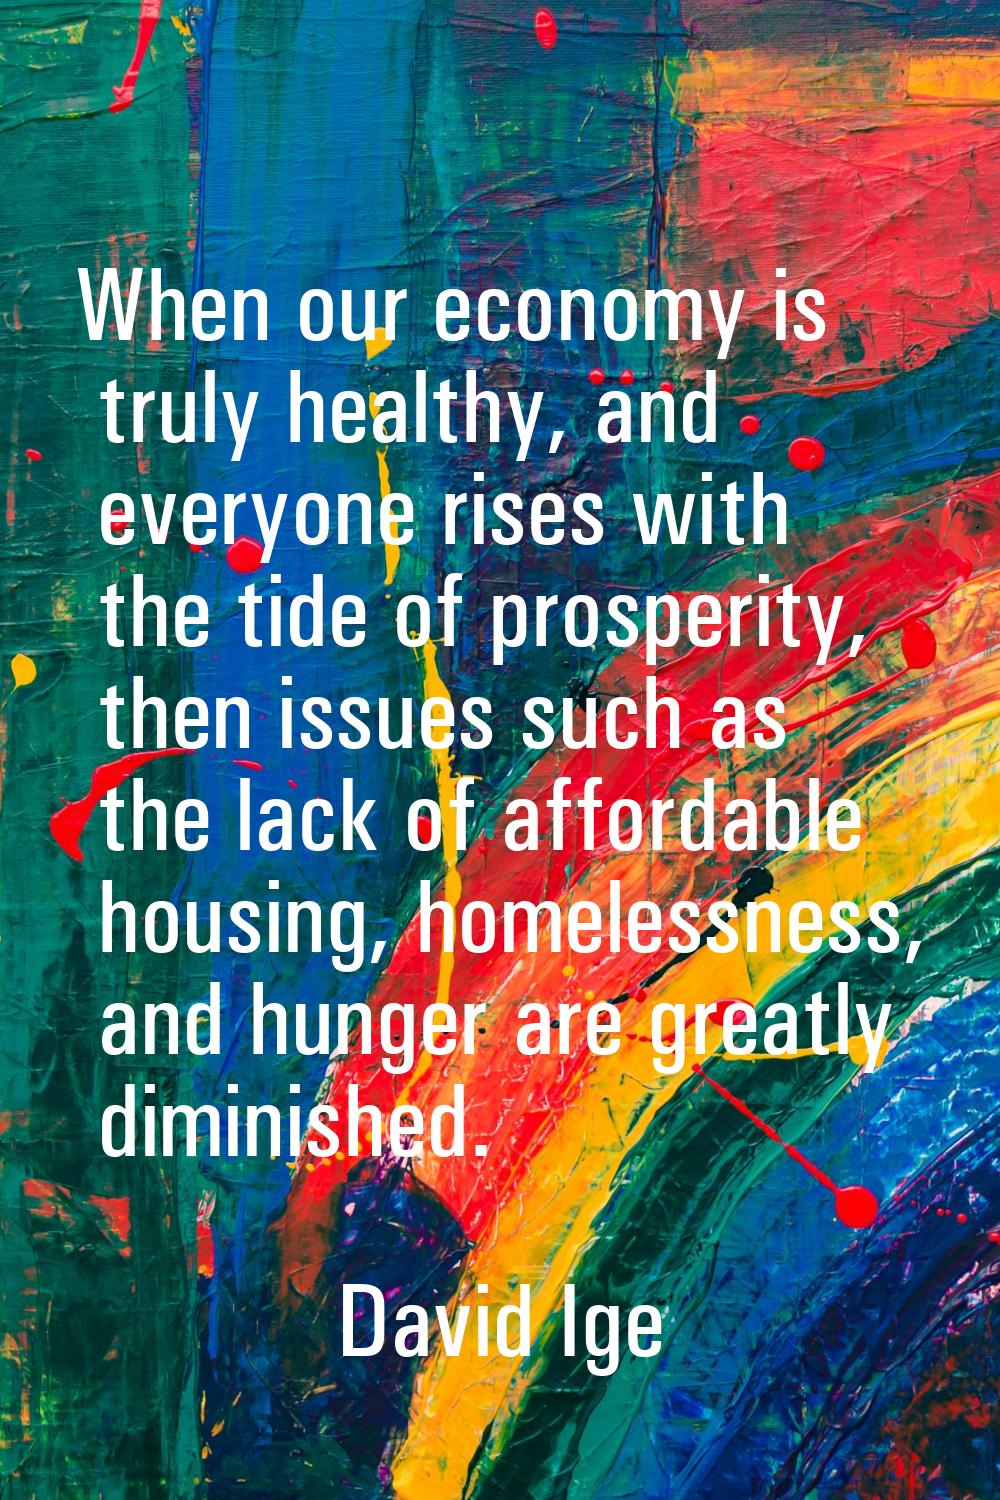 When our economy is truly healthy, and everyone rises with the tide of prosperity, then issues such